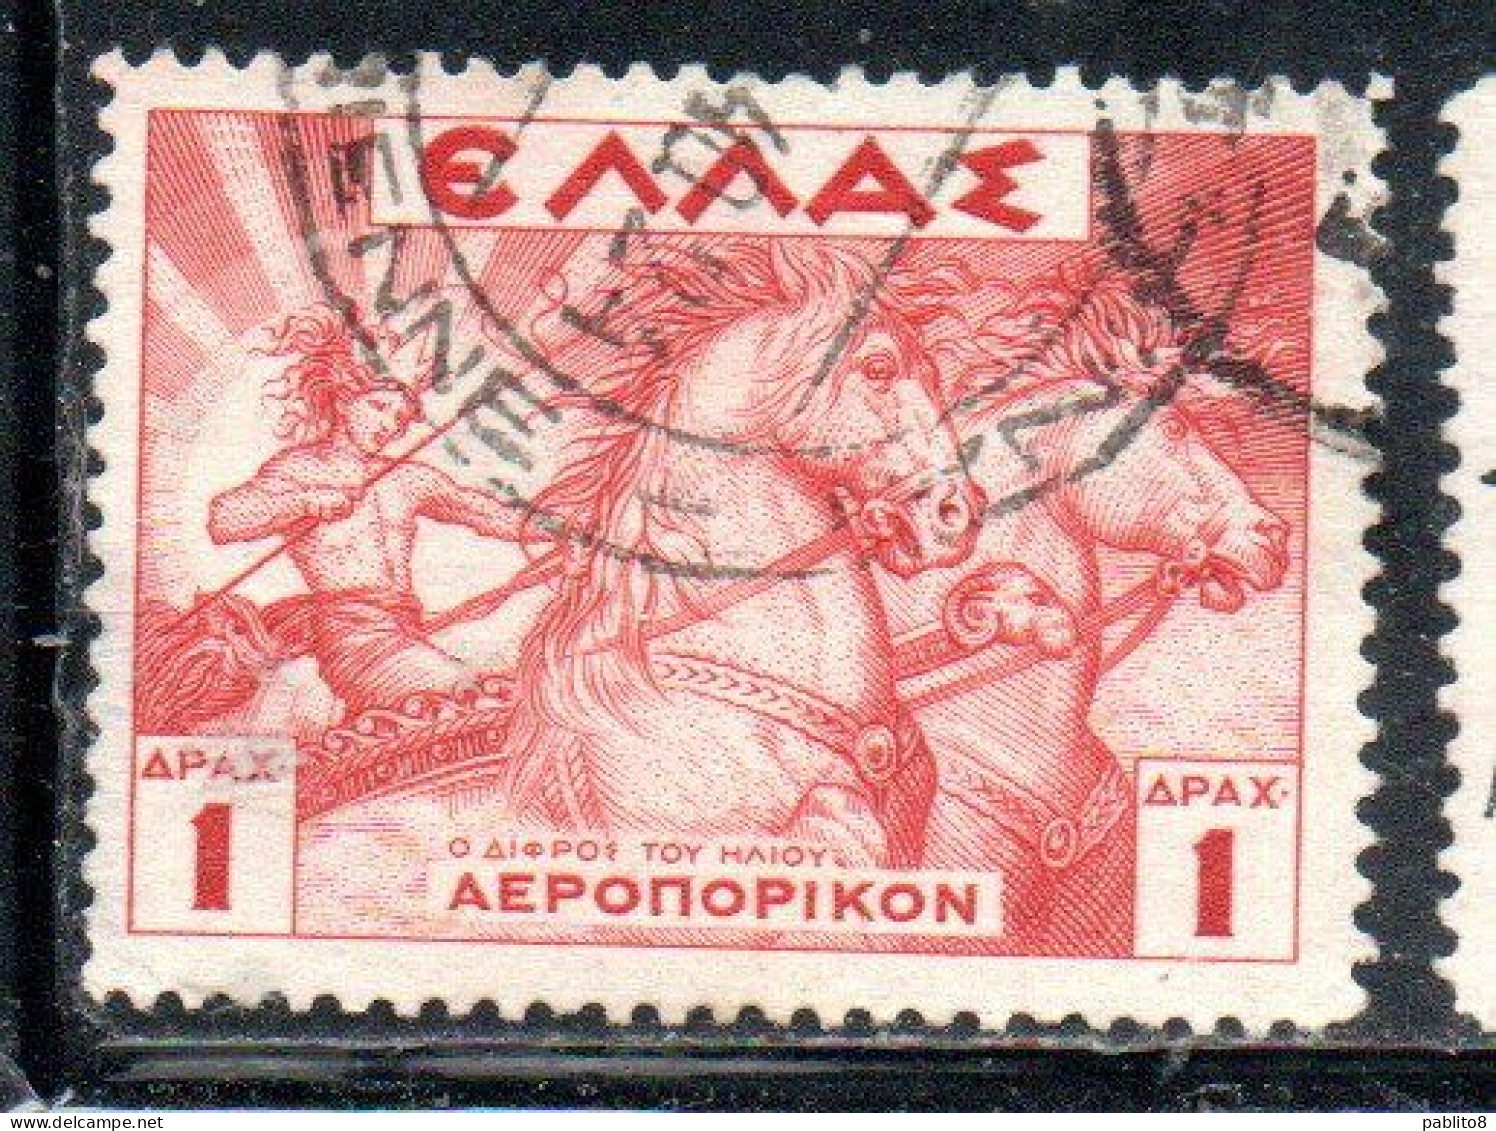 GREECE GRECIA ELLAS 1935 AIR POST MAIL AIRMAIL MYTHOLOGICAL HELIOS DRIVING THE SUN CHARIOT 1d USED USATO OBLITERE' - Oblitérés